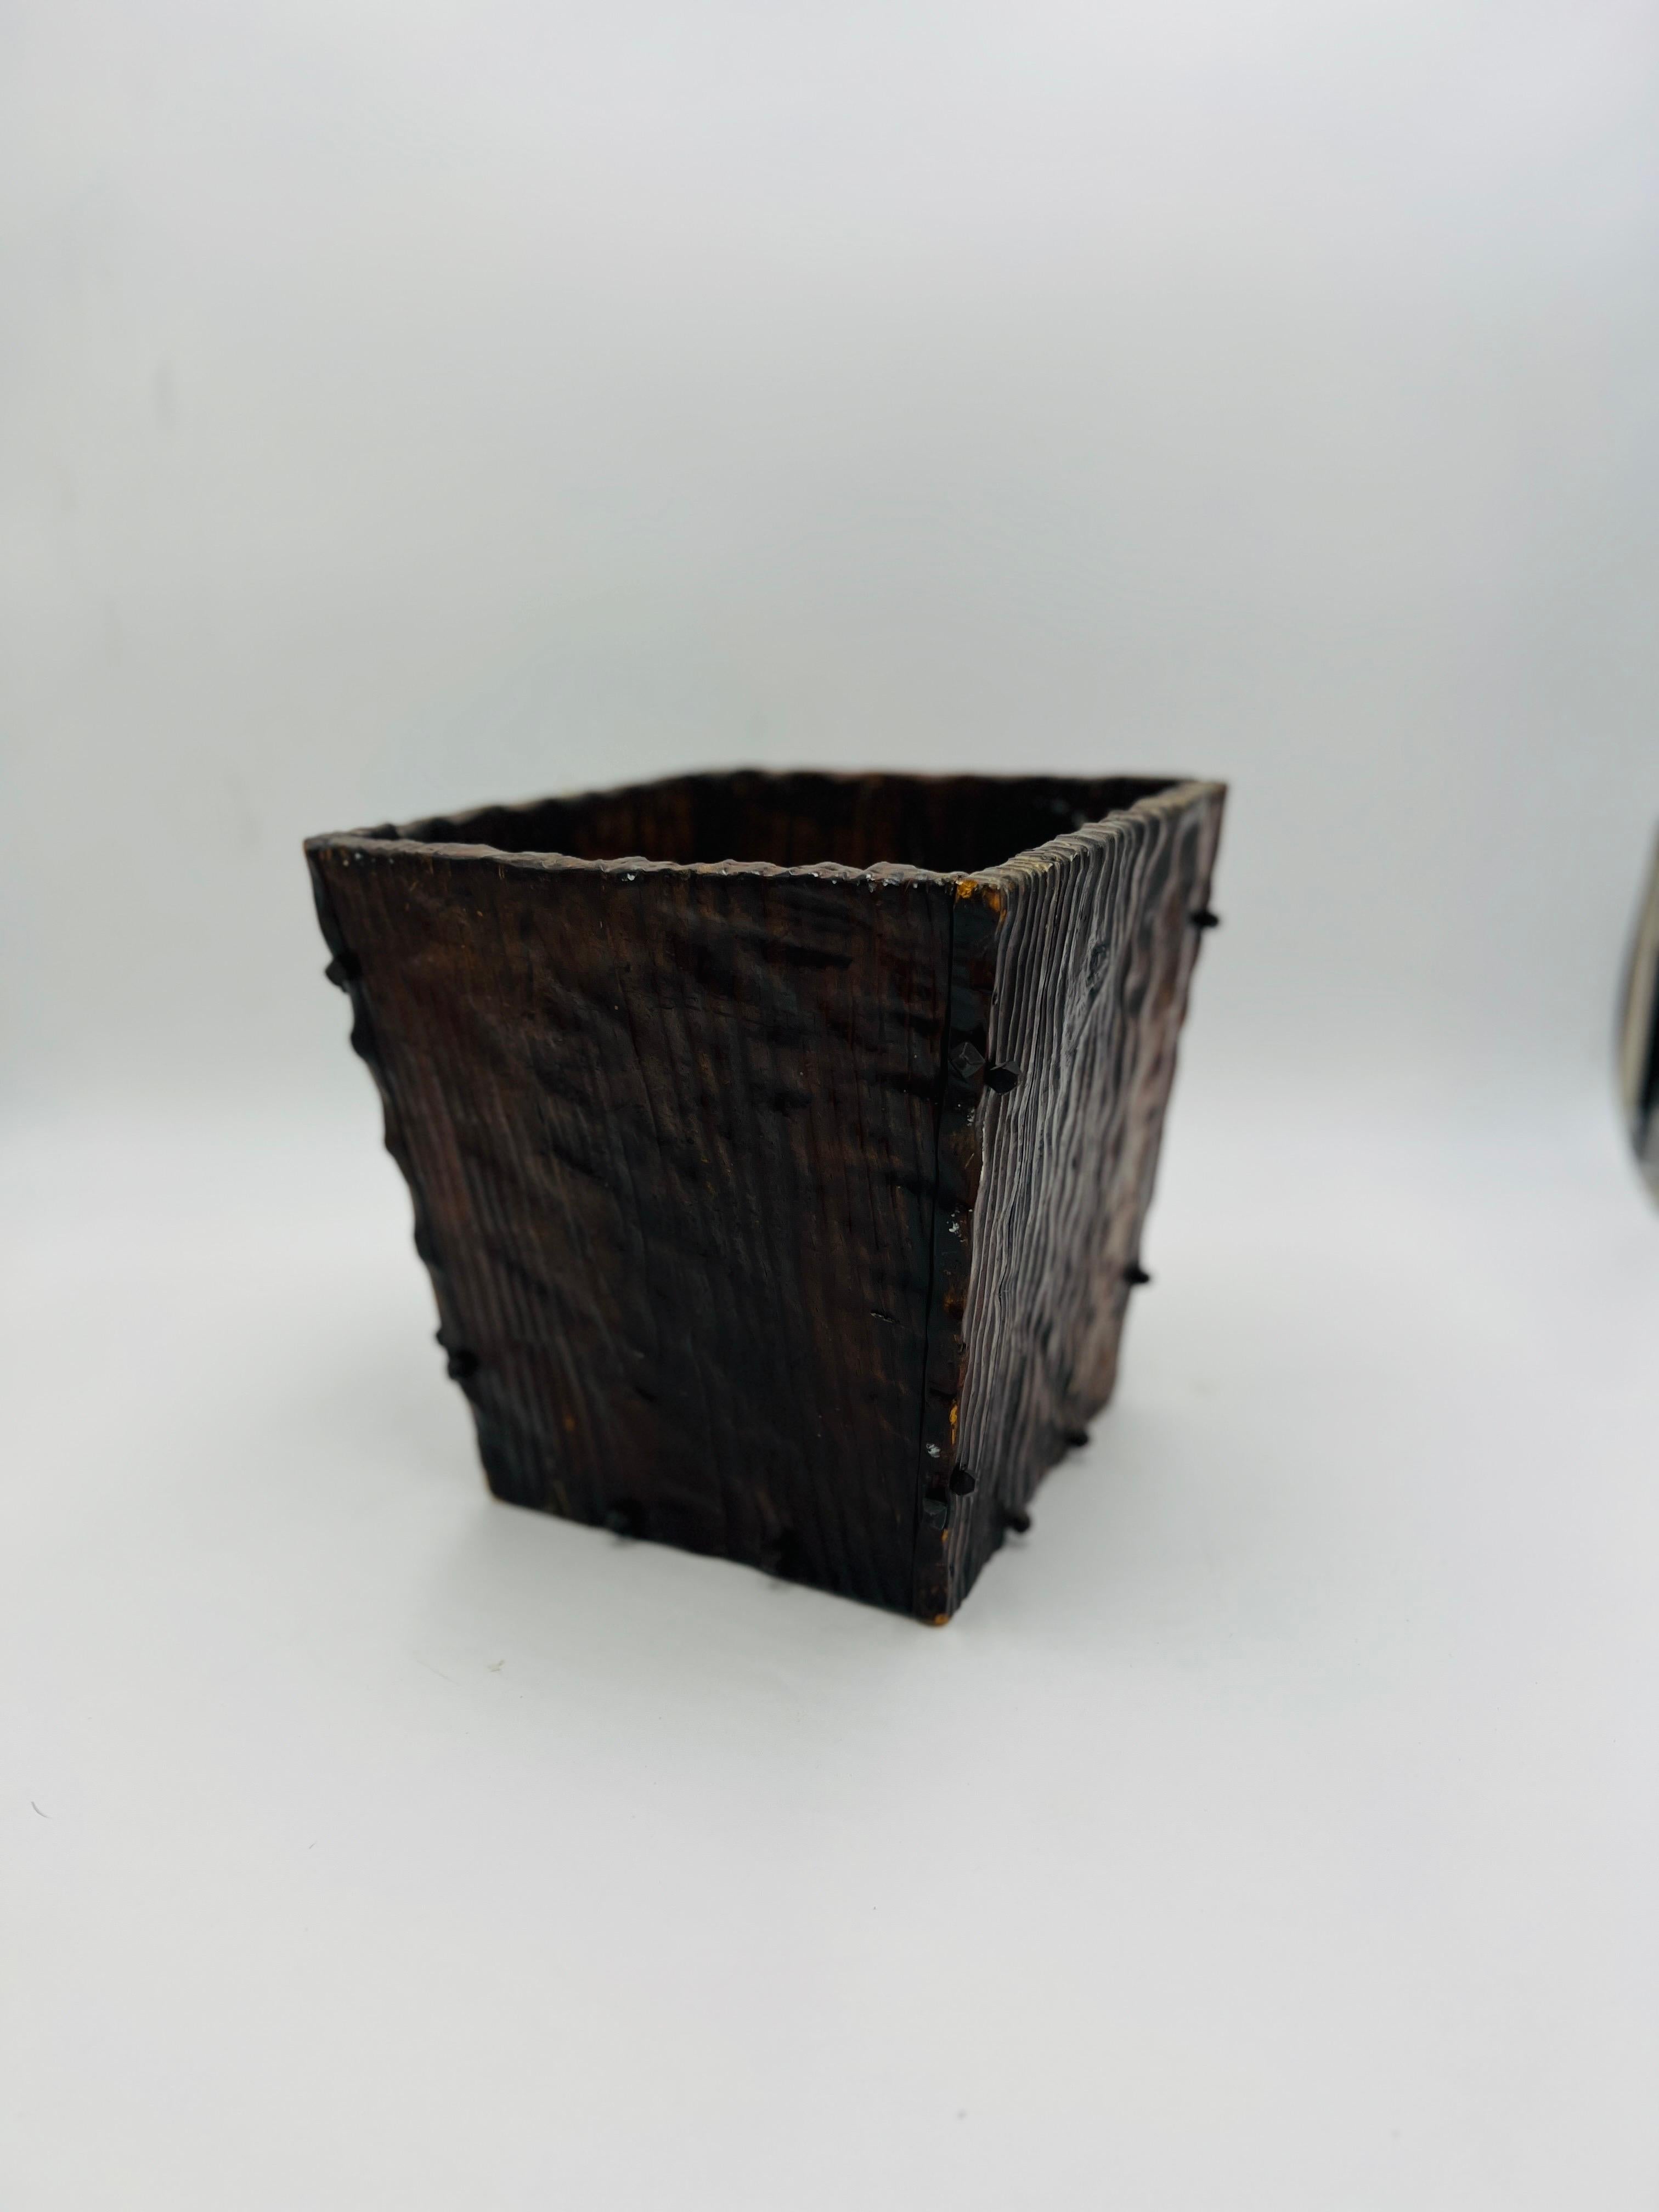 An antique 19th century German black forest waste paper basket or trash can. Constructed likely from walnut and mounted with hand forged iron pins. Faux bois finished across surface.